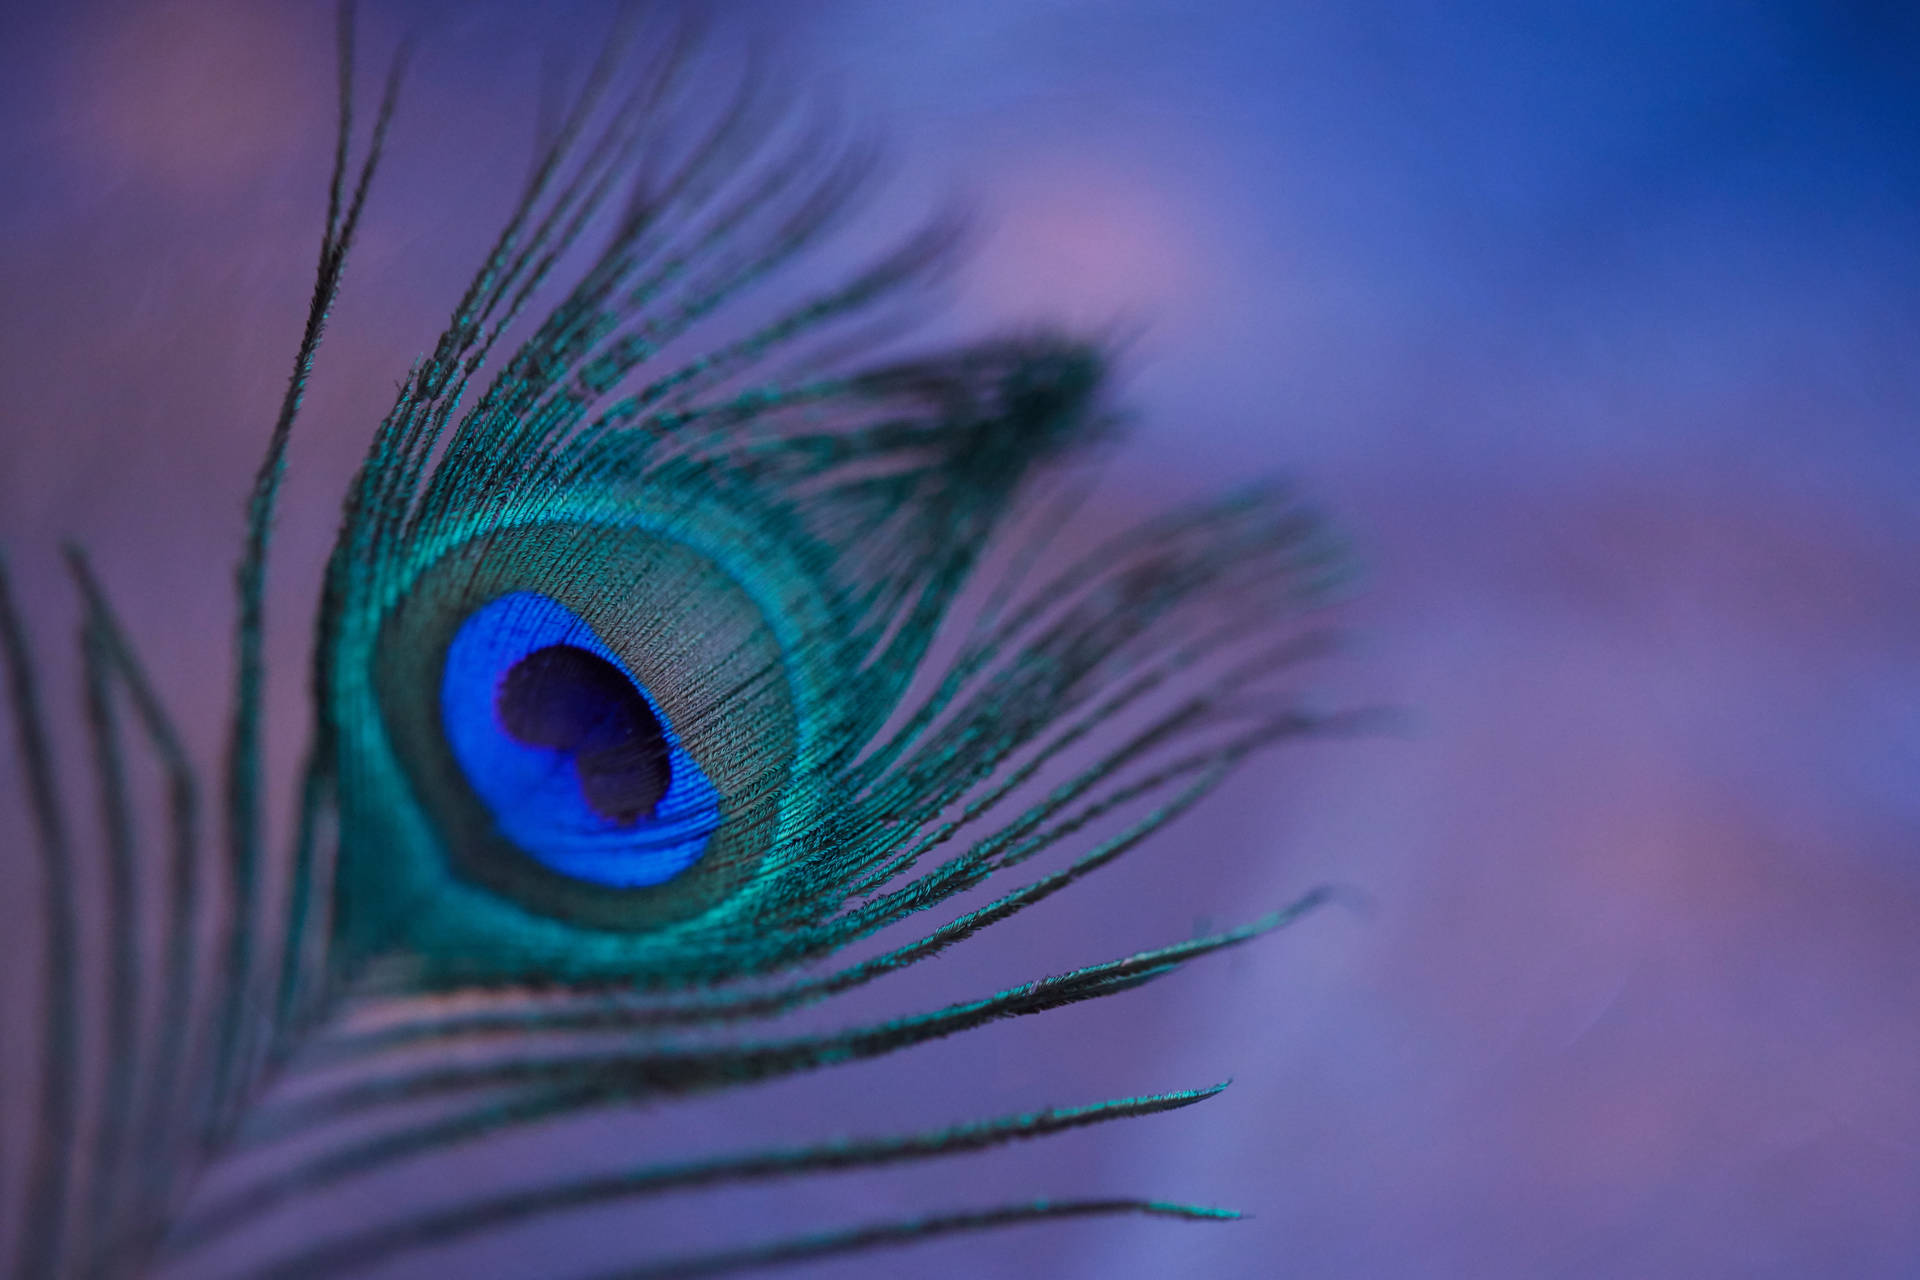 Radiant Blue-Green Mor Pankh (Peacock Feather) Against a High Contrast Background Wallpaper